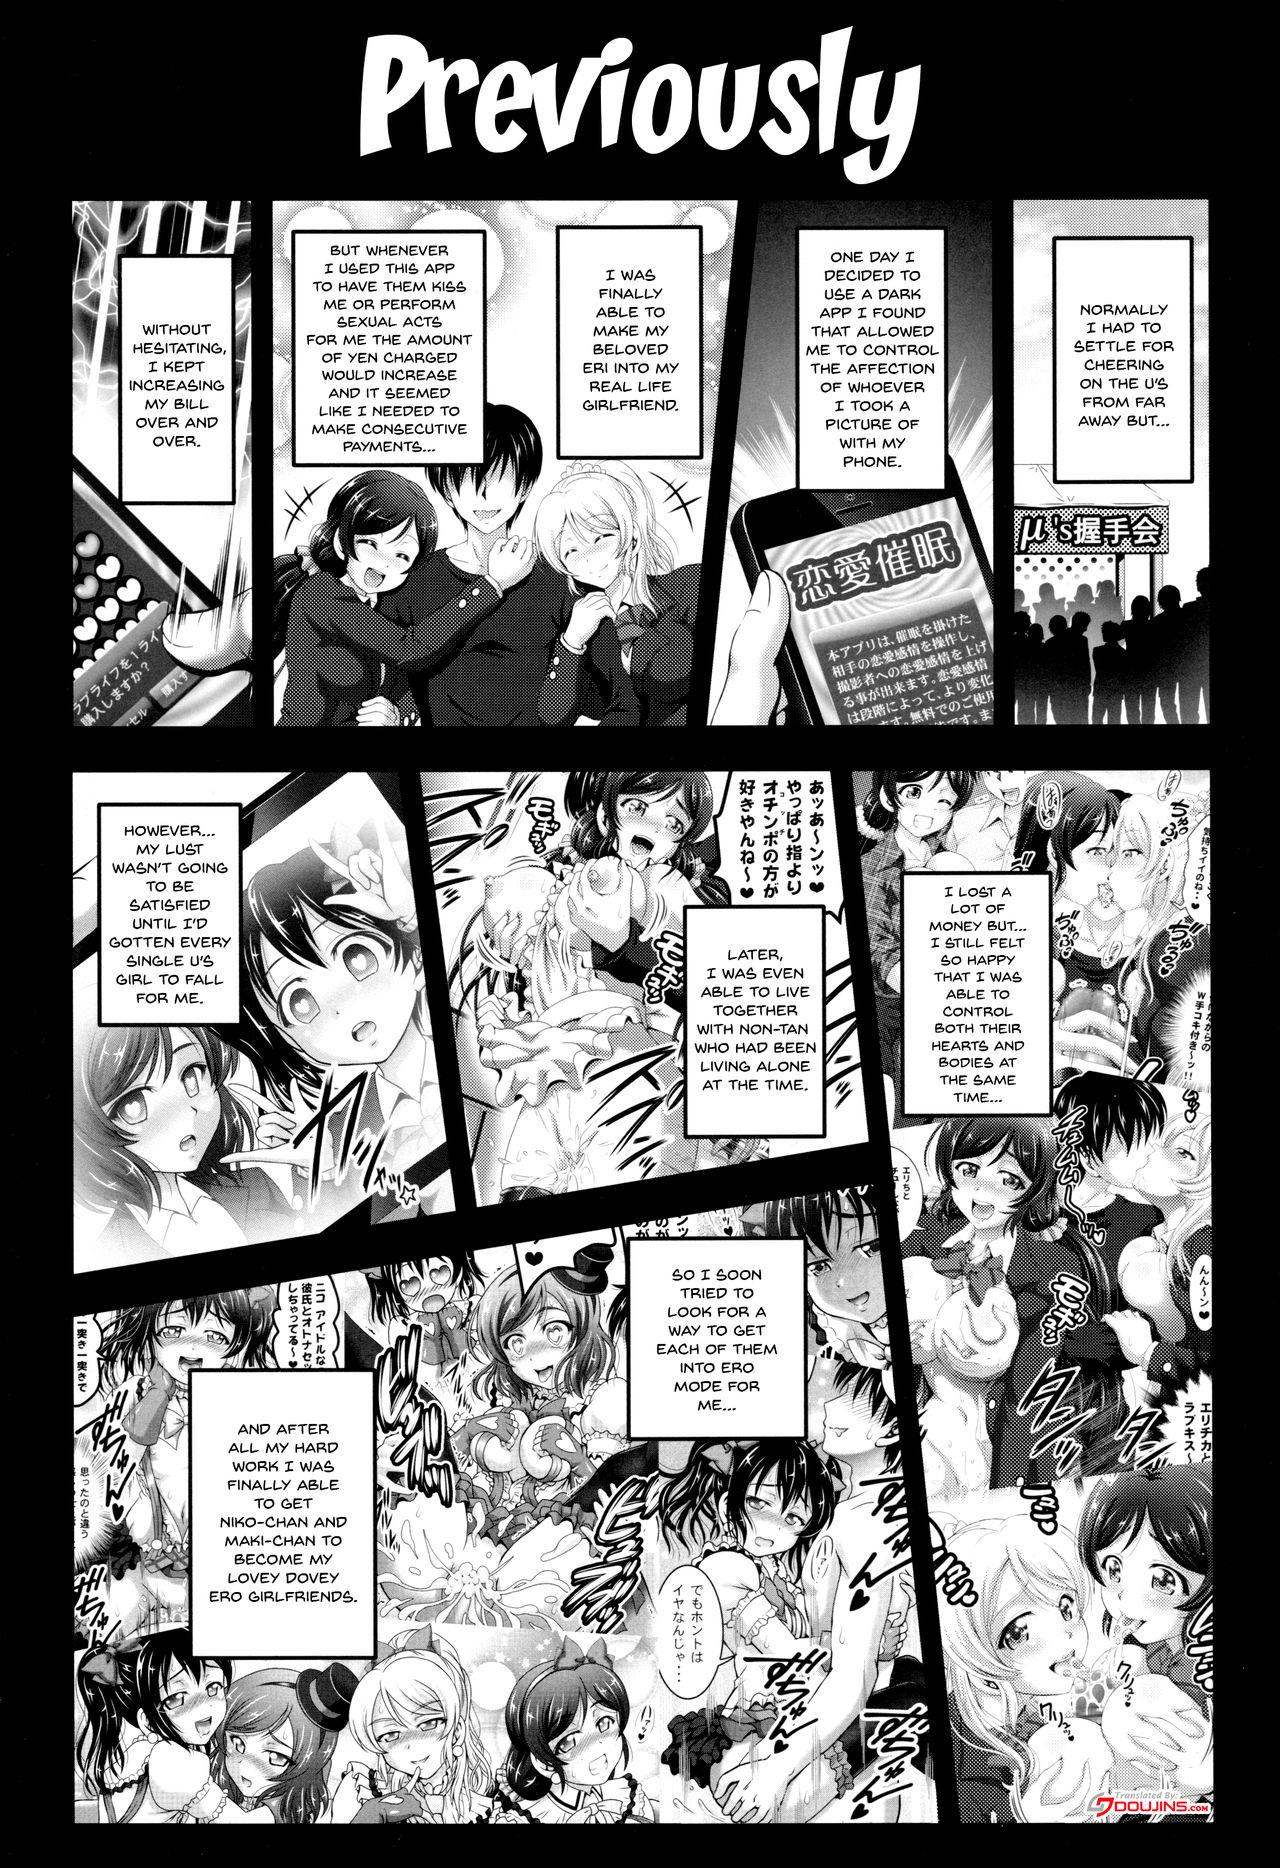 Ffm Ore Yome Saimin 4 | My Wife Hypnosis 4 - Love live Perfect Girl Porn - Page 2